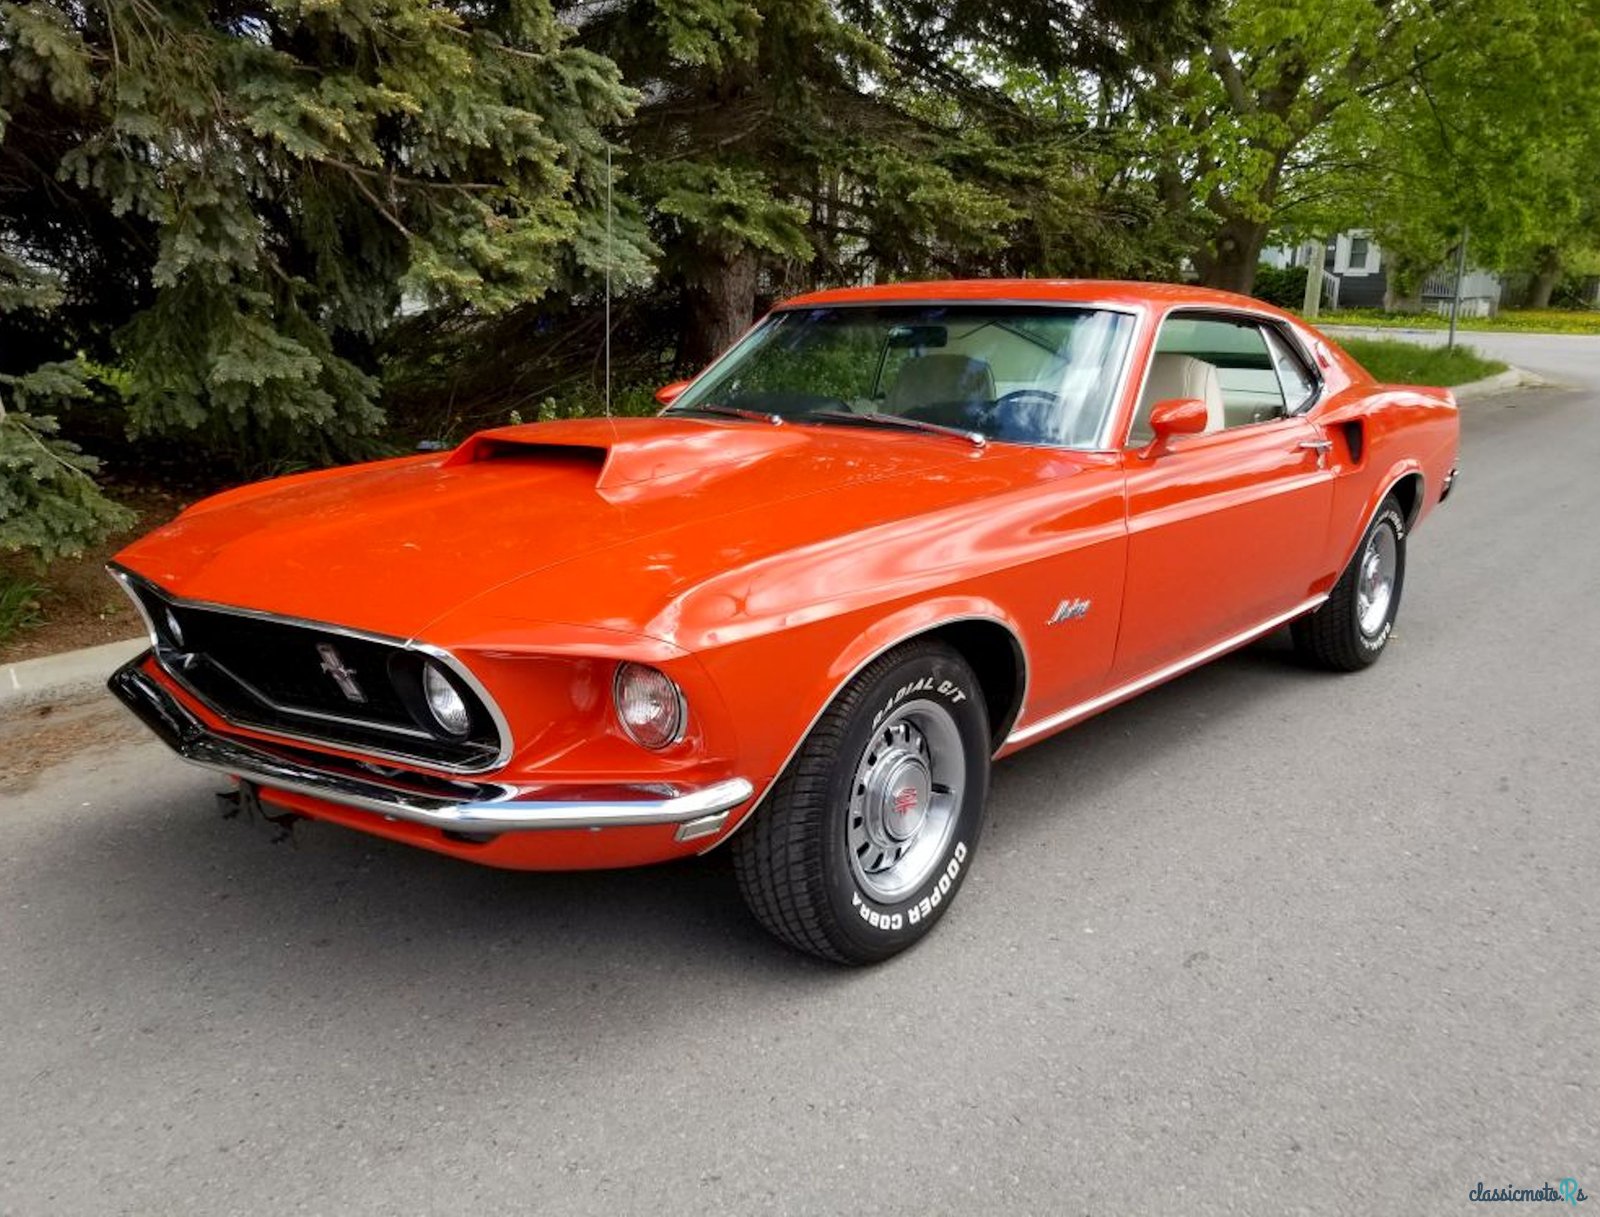 1969' Ford Mustang Fastback for sale. Canada